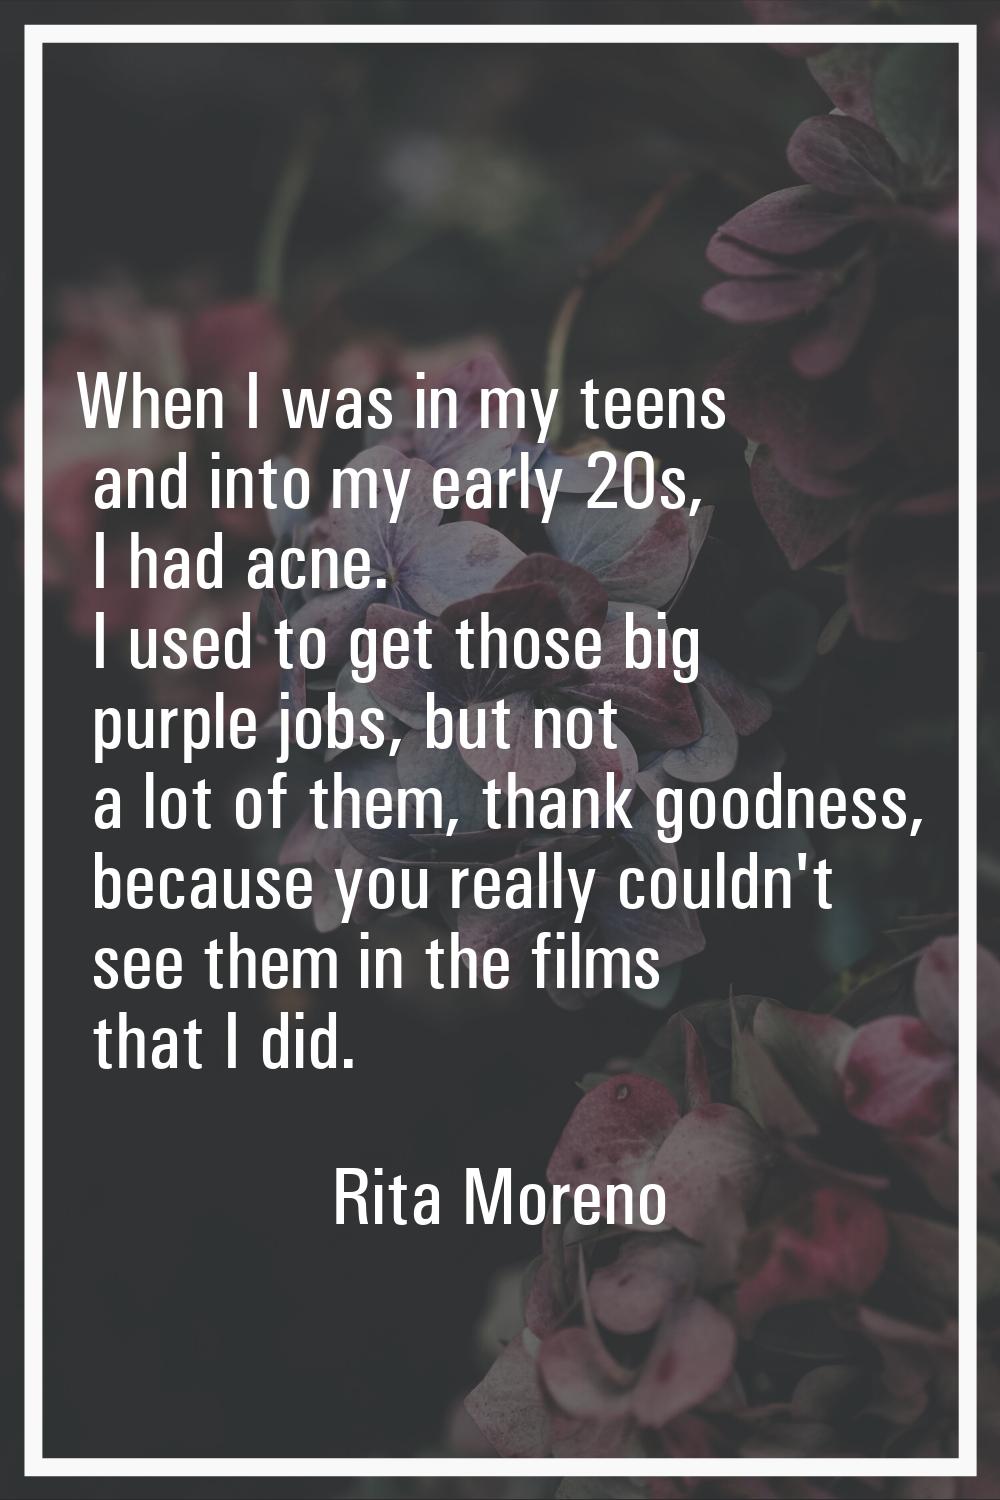 When I was in my teens and into my early 20s, I had acne. I used to get those big purple jobs, but 